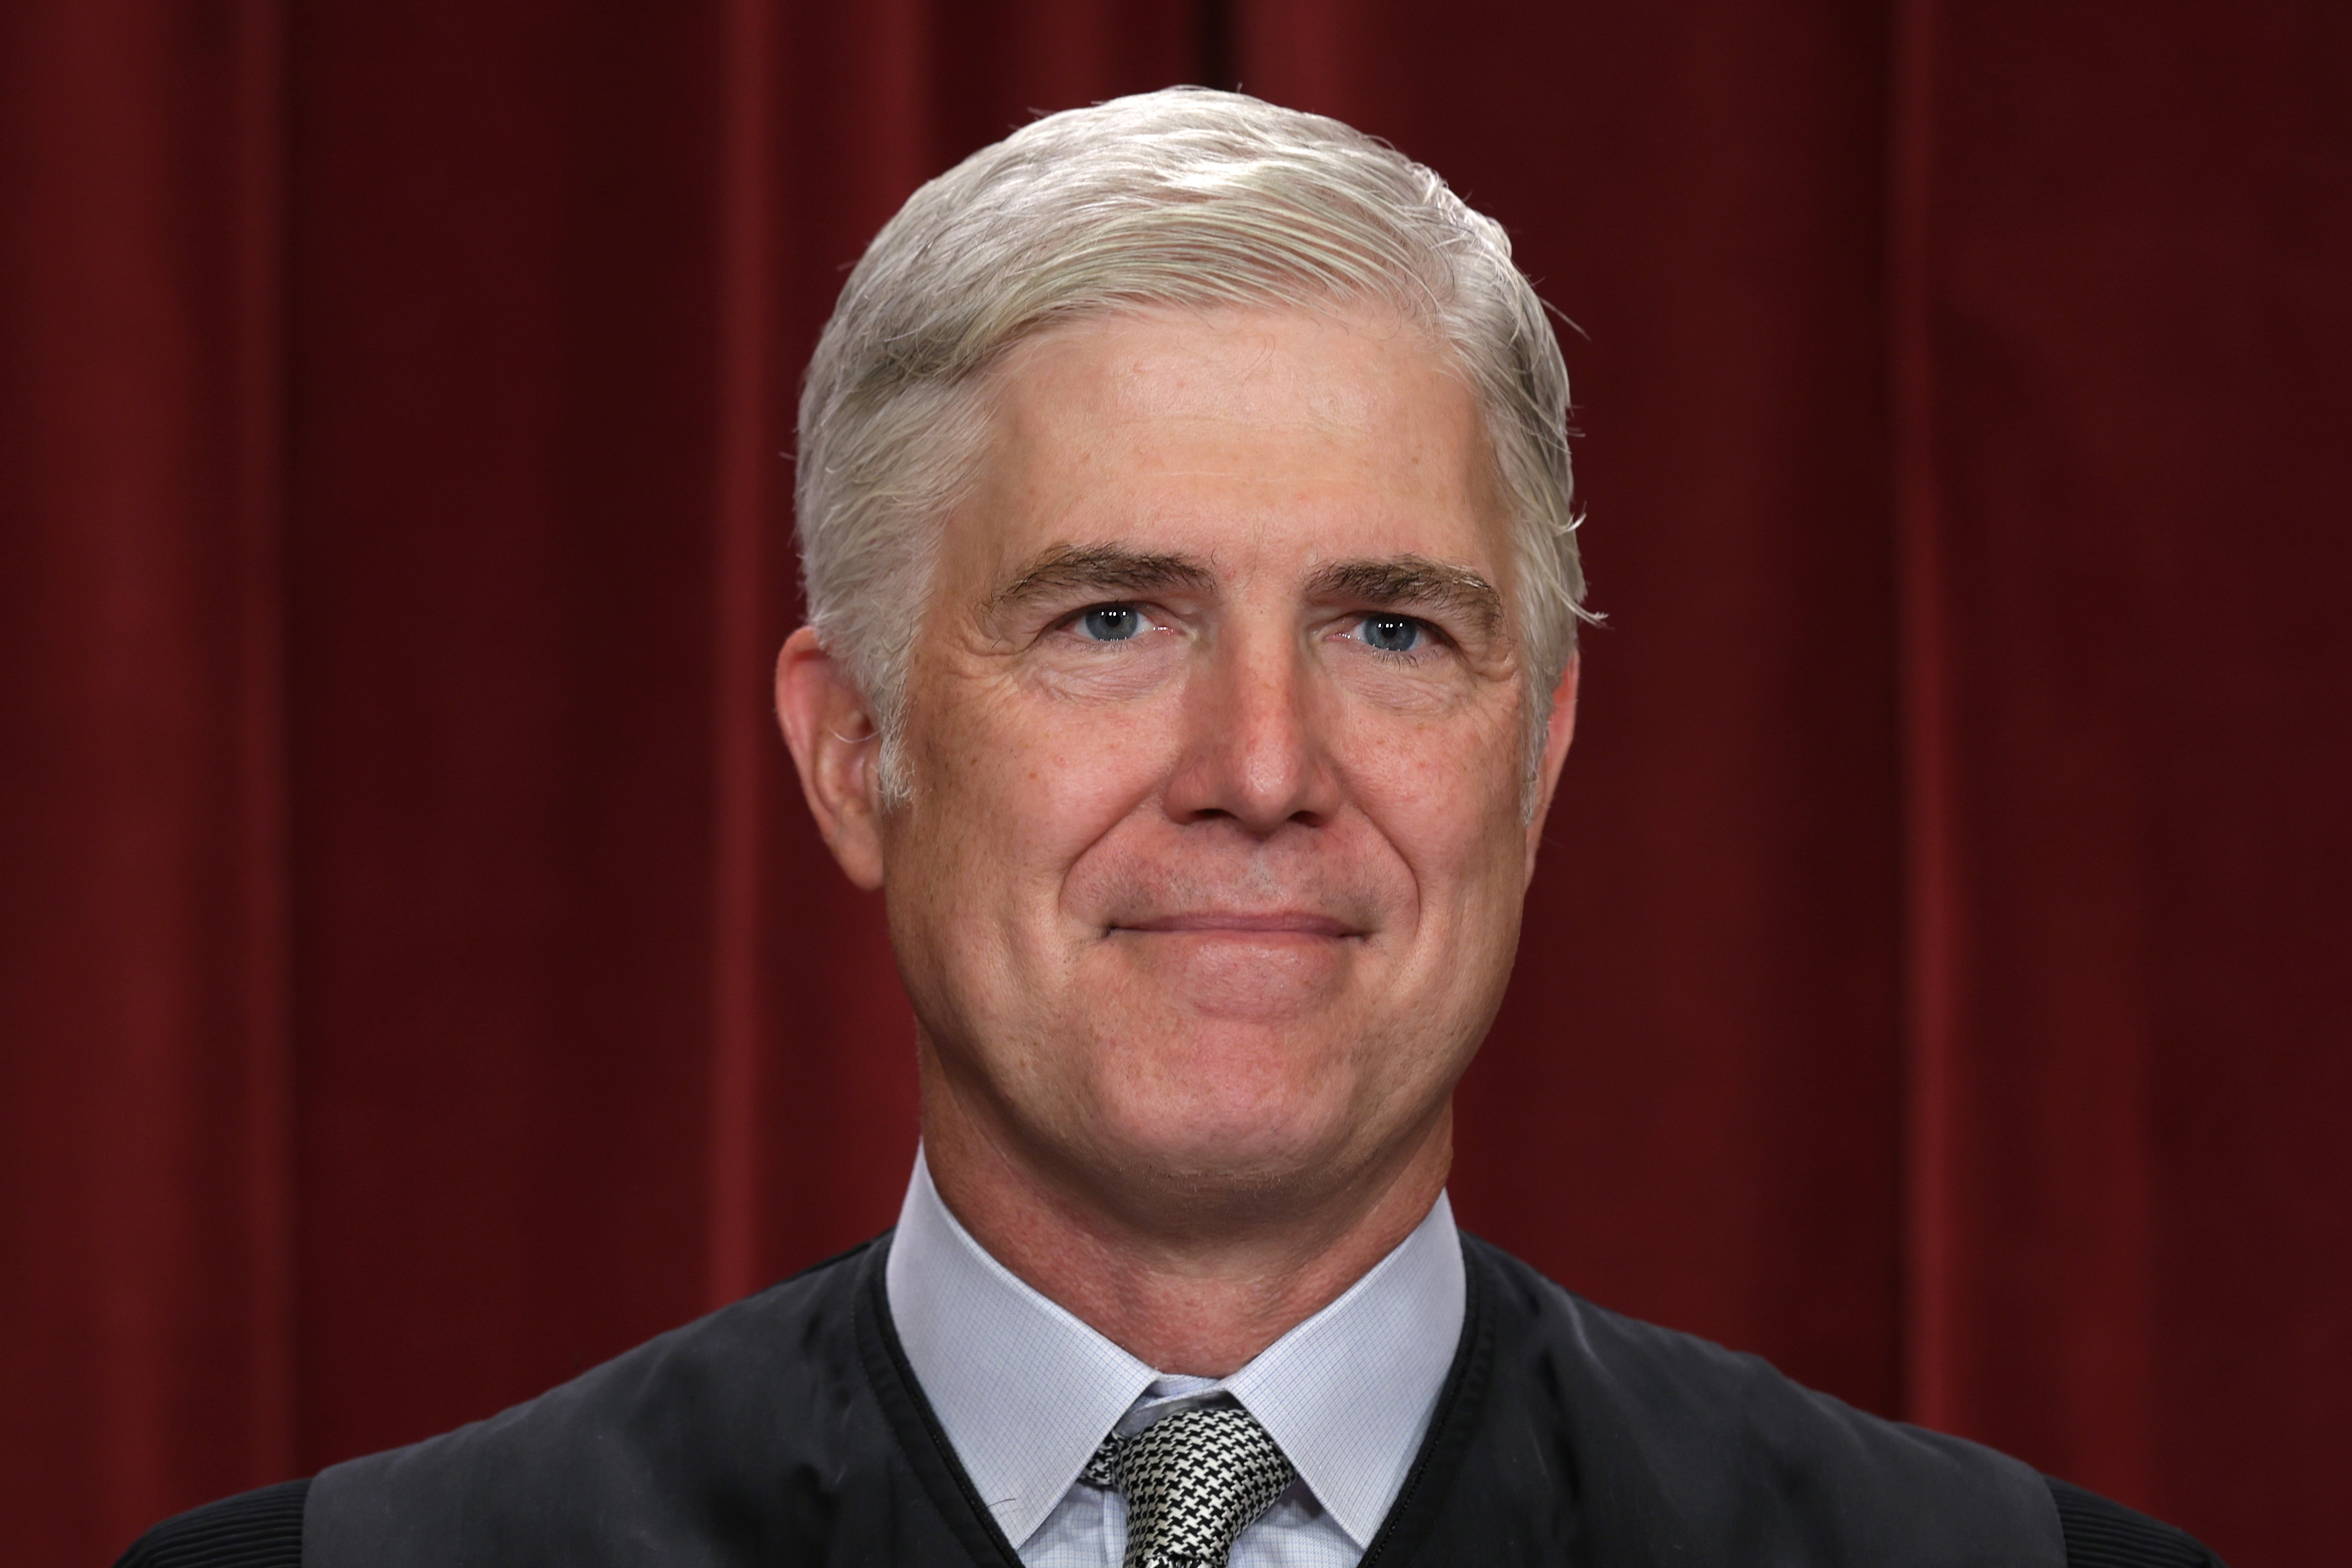 Justice Neil Gorsuch poses for an official portrait at the Supreme Court in Washington, DC, in 2022.